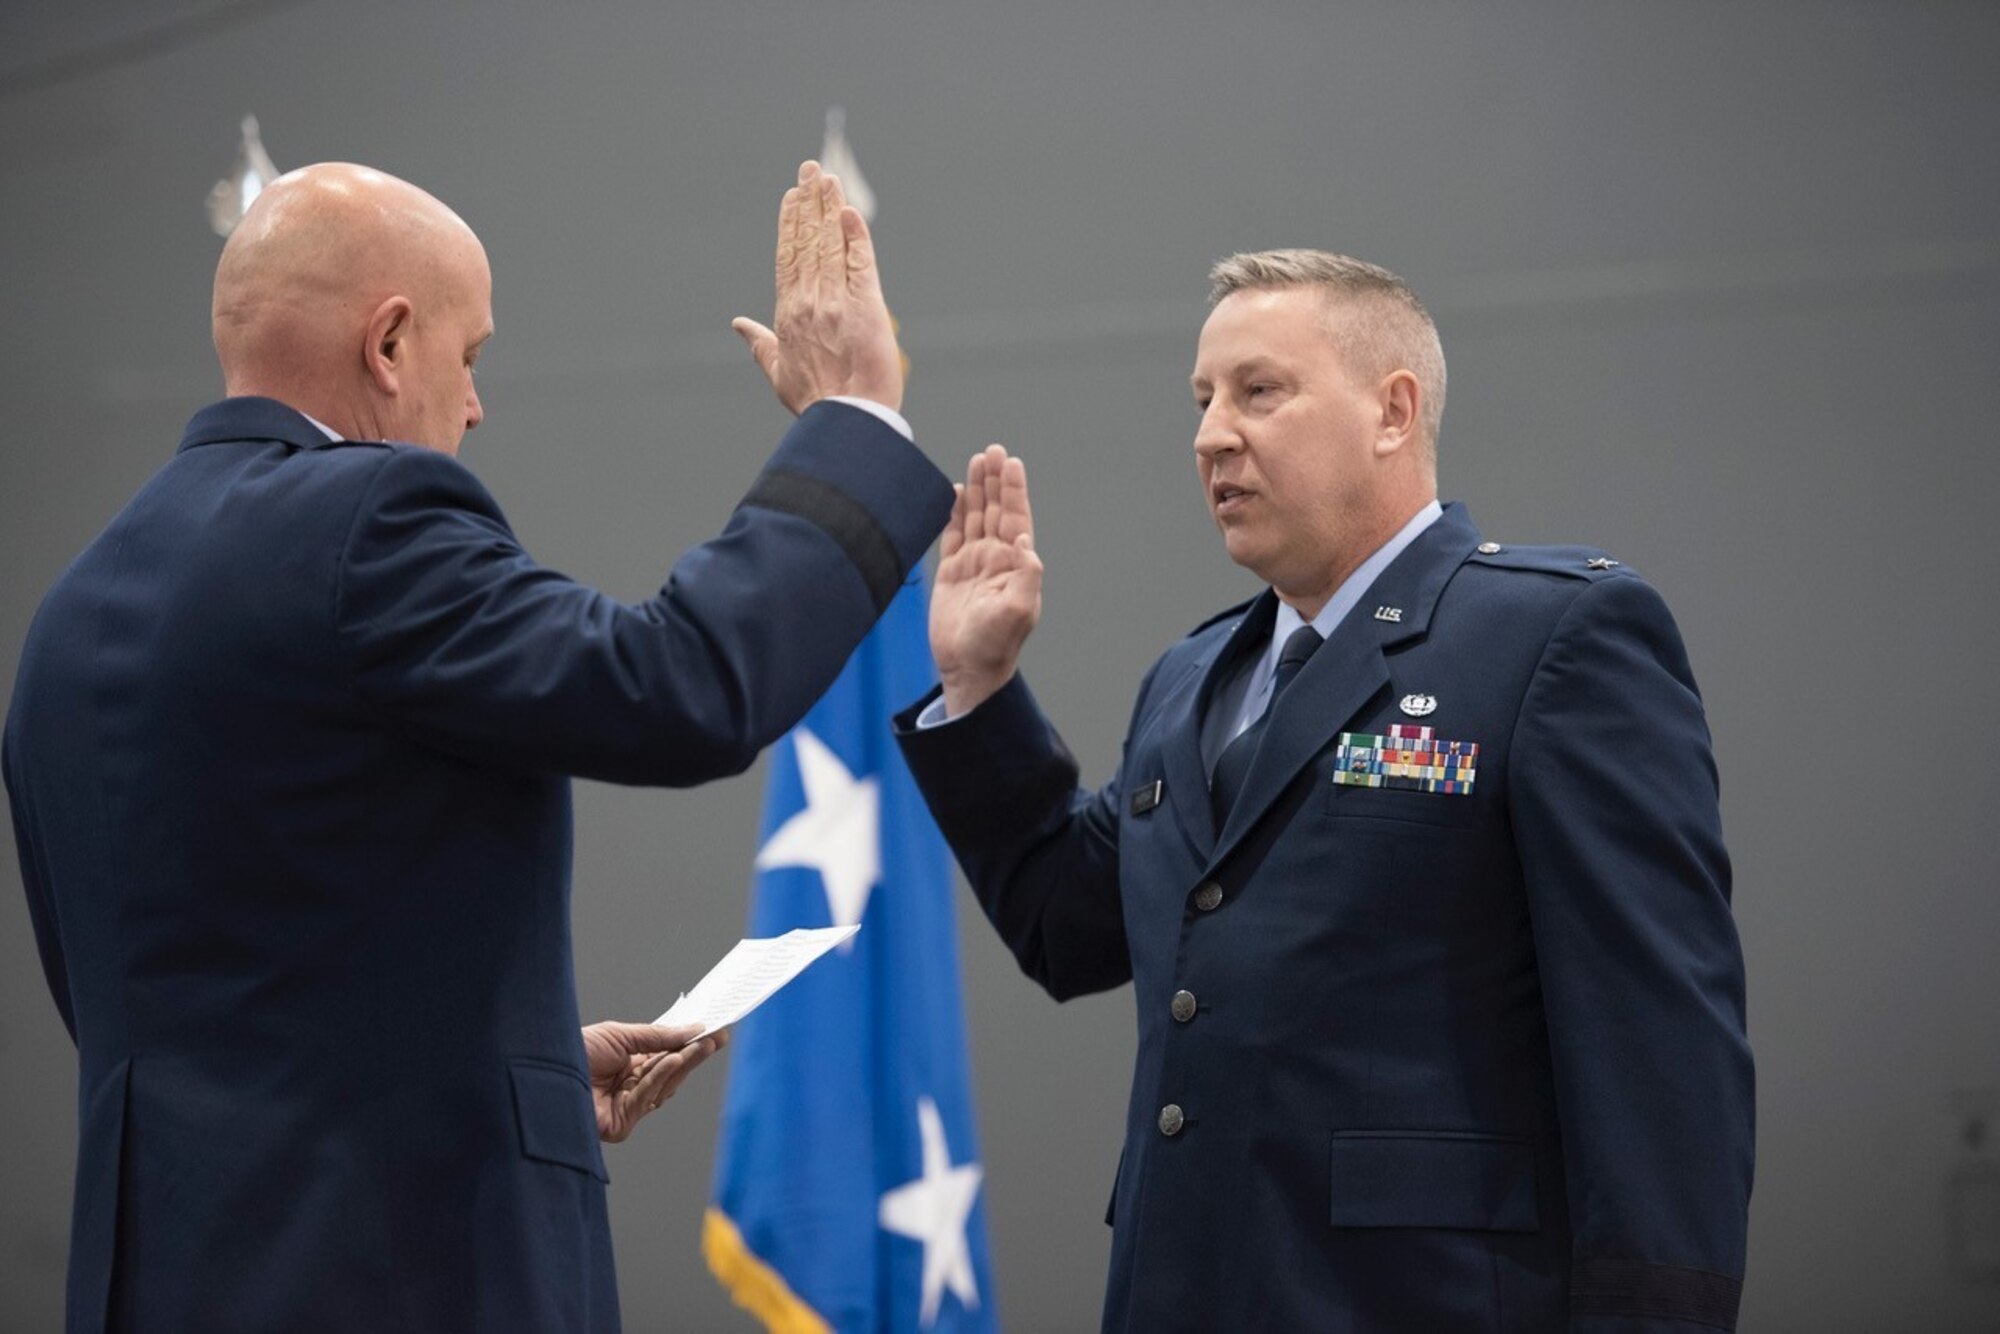 Brig. Gen. Ray Shepard takes the oath of office, administered by retired Maj. Gen. Eric Vollmecke, during Shepard’s promotion ceremony at the 167th Airlift Wing, March 3, 2019. Shepard served as a Staff Judge Advocate at the 167th AW for approximately 10 years before moving on to serve as the State Staff Judge Advocate for the West Virginia Air National Guard and currently as the Chief of Staff of the WVANG. (U.S. Air National Guard photos by Tech. Sgt. Michael Dickson)